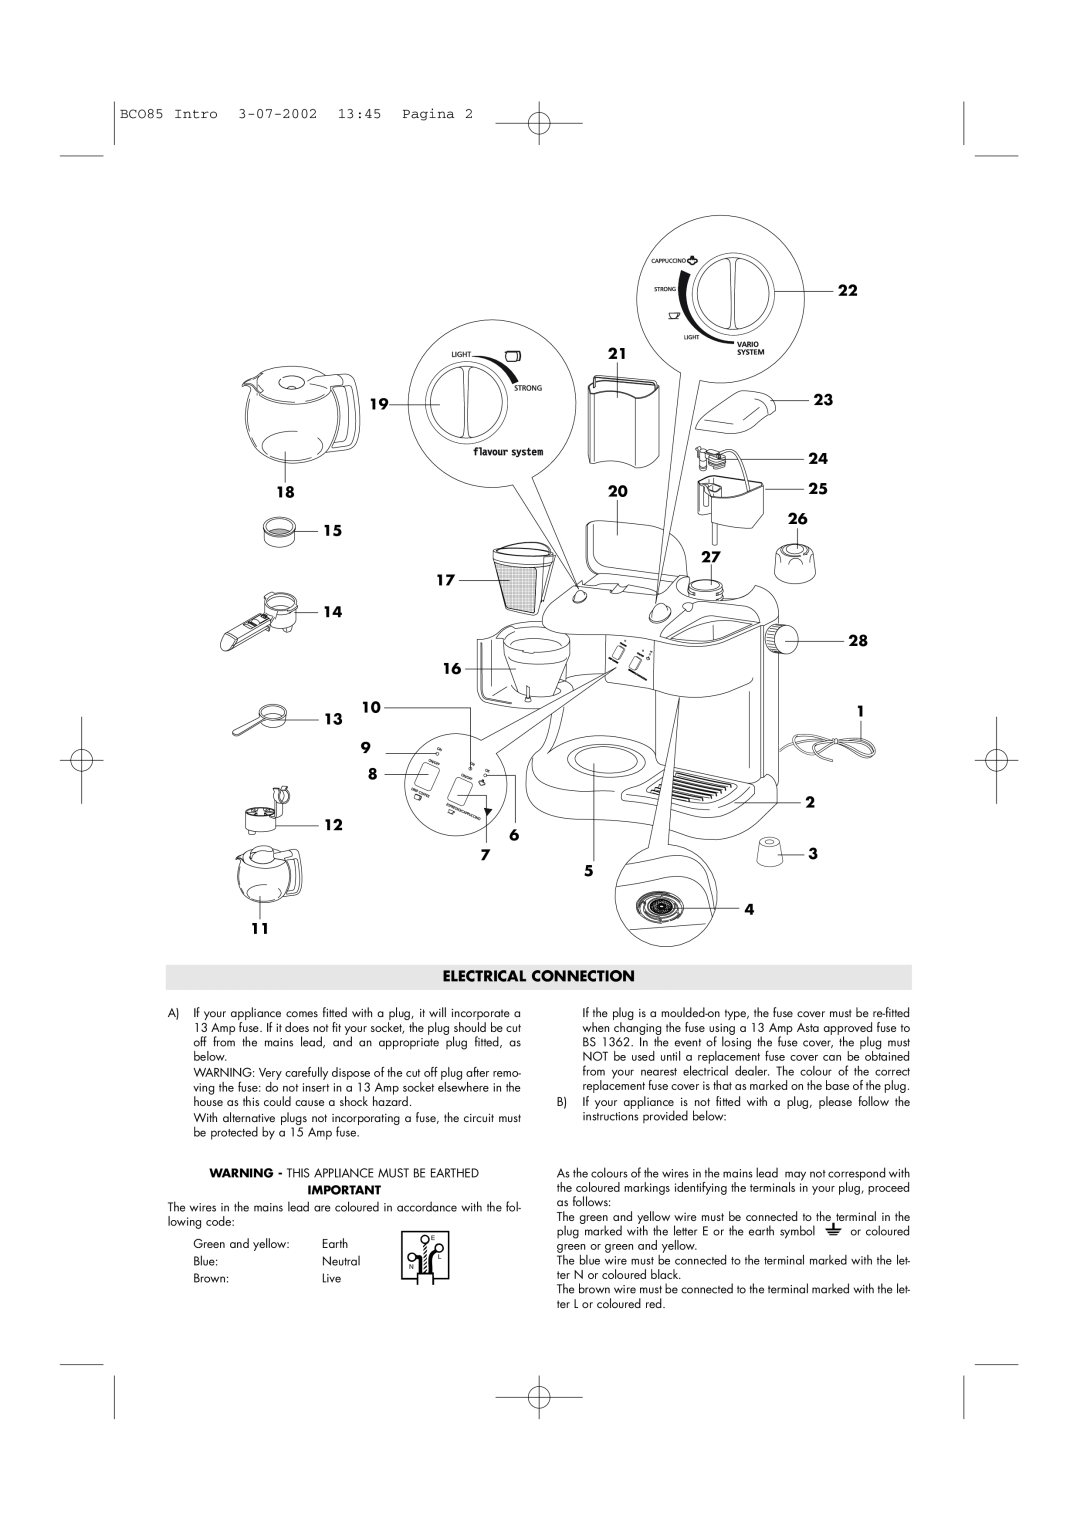 DeLonghi BCO85 GB manual 17 16, 9 8 12 6, Electrical Connection 